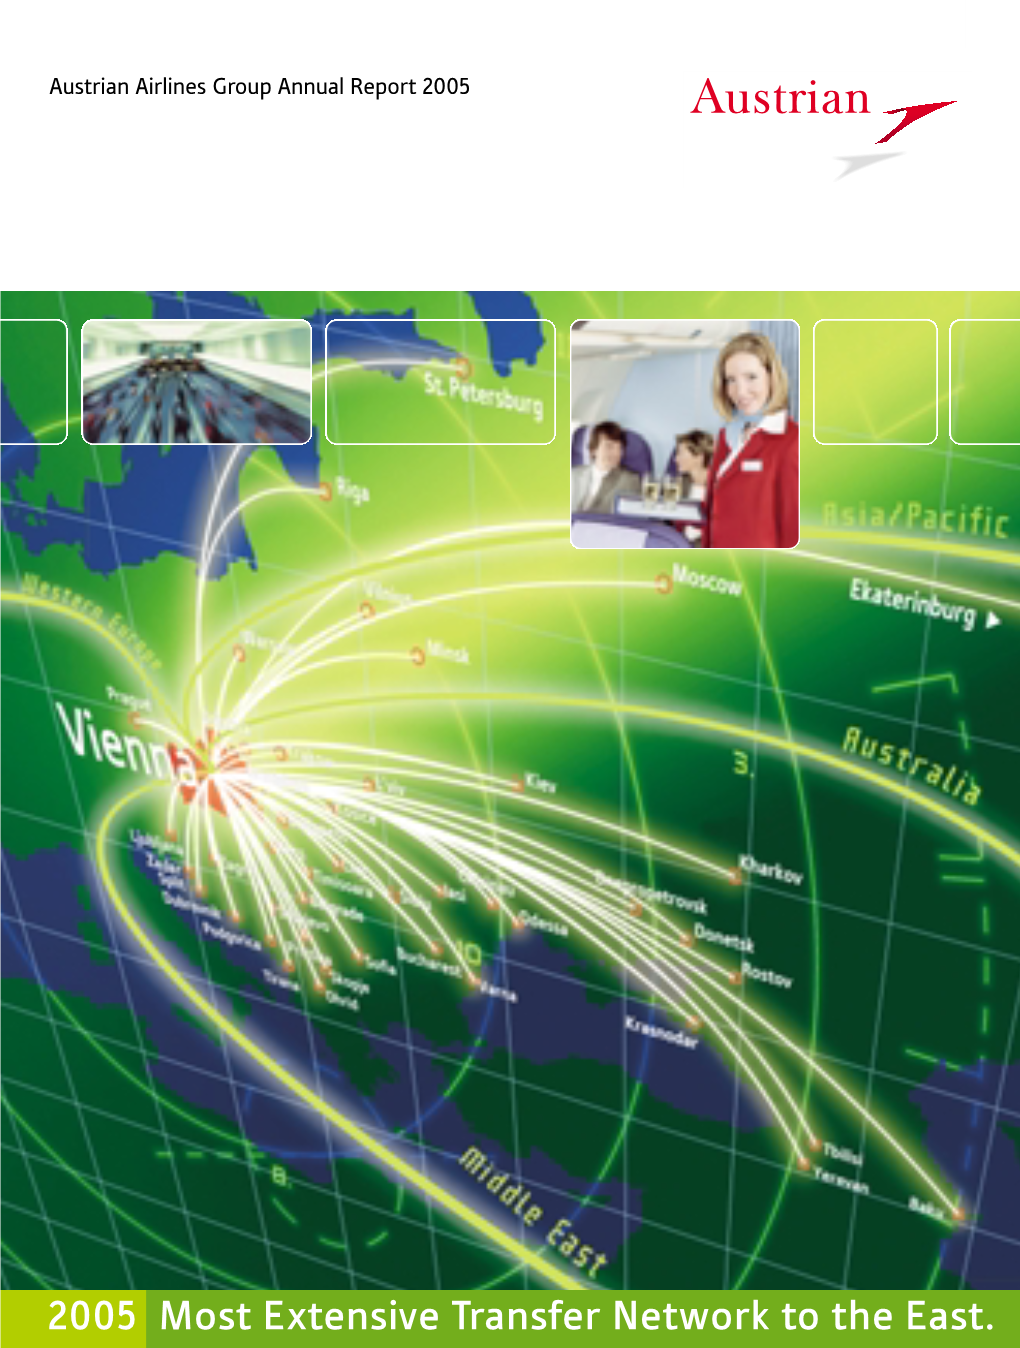 2005 Most Extensive Transfer Network to the East. Austrian Airlines Group Annual Report 2005